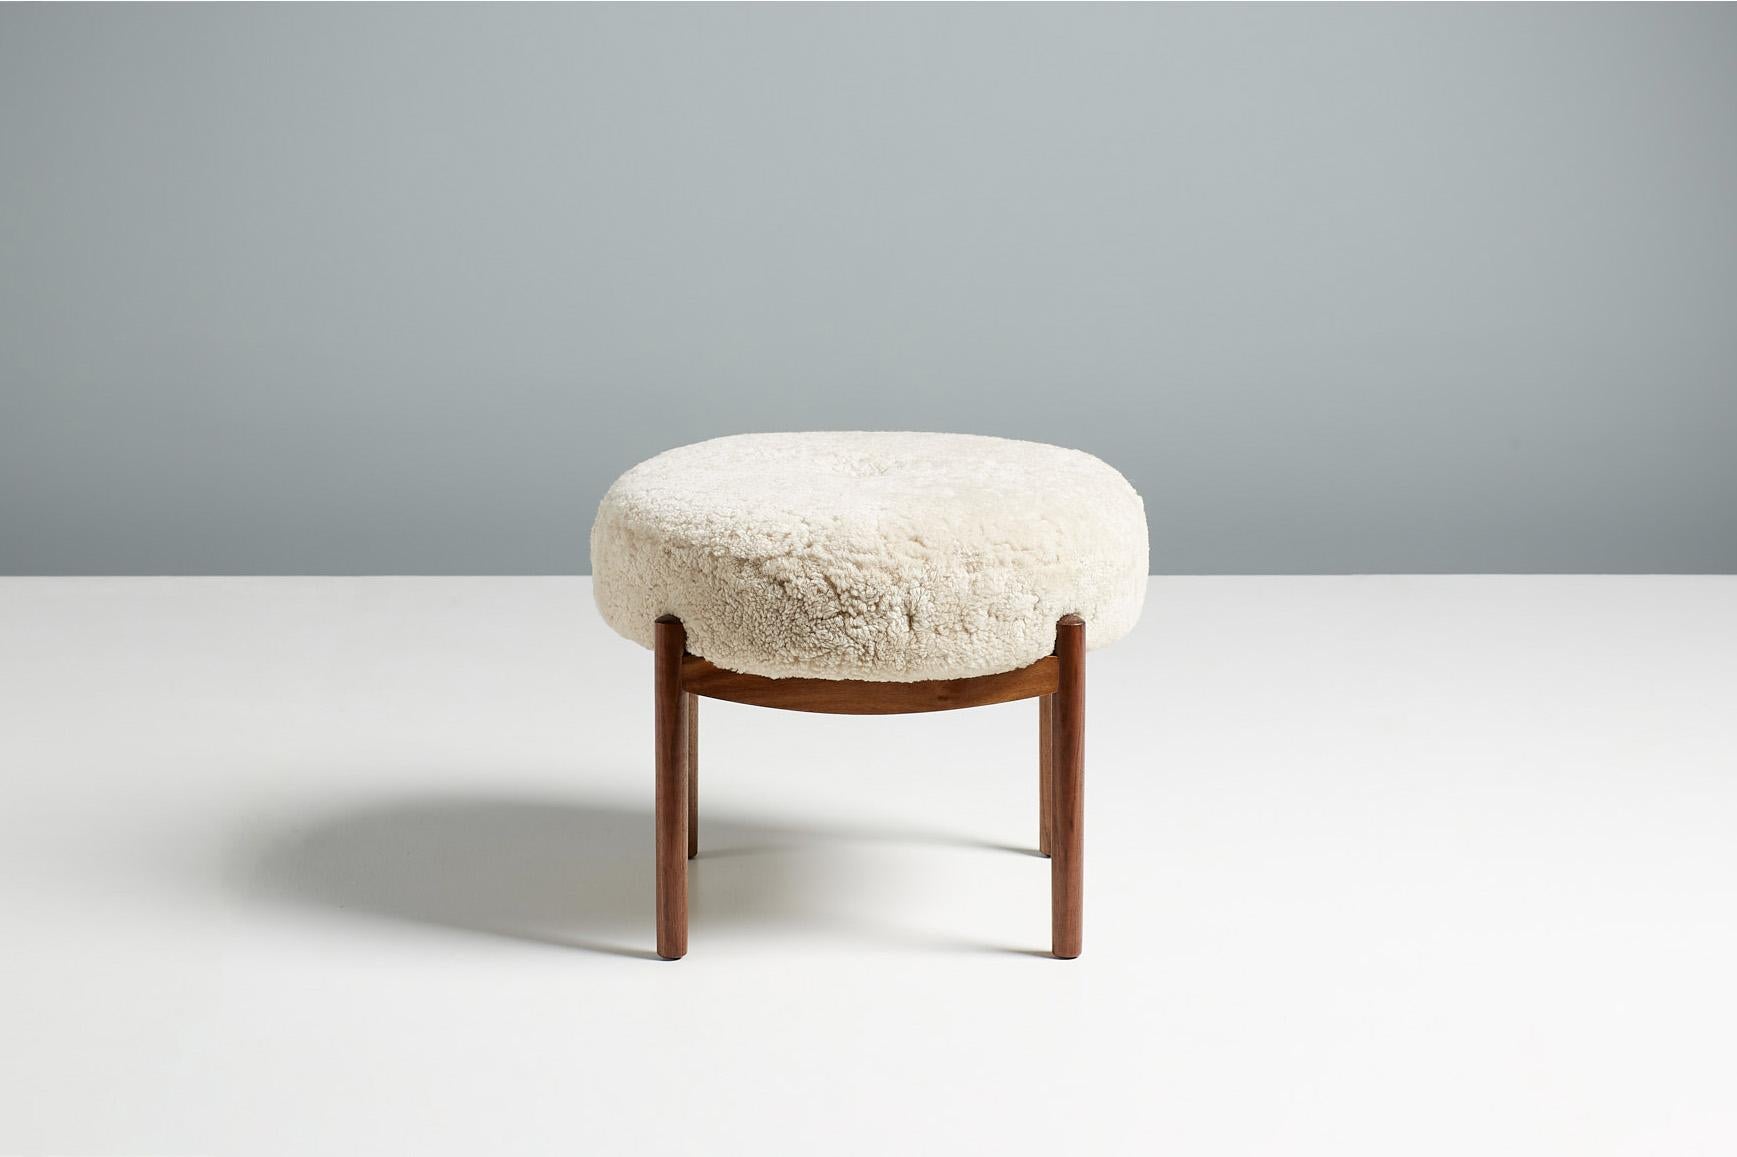 Custom Made Esko ottoman from Dagmar design

A custom-made round ottoman with oiled walnut frame developed & produced at Dagmar's workshops in London. This example has a seat upholstered in luxurious Moonlight sheepskin. The Esko stool is part of